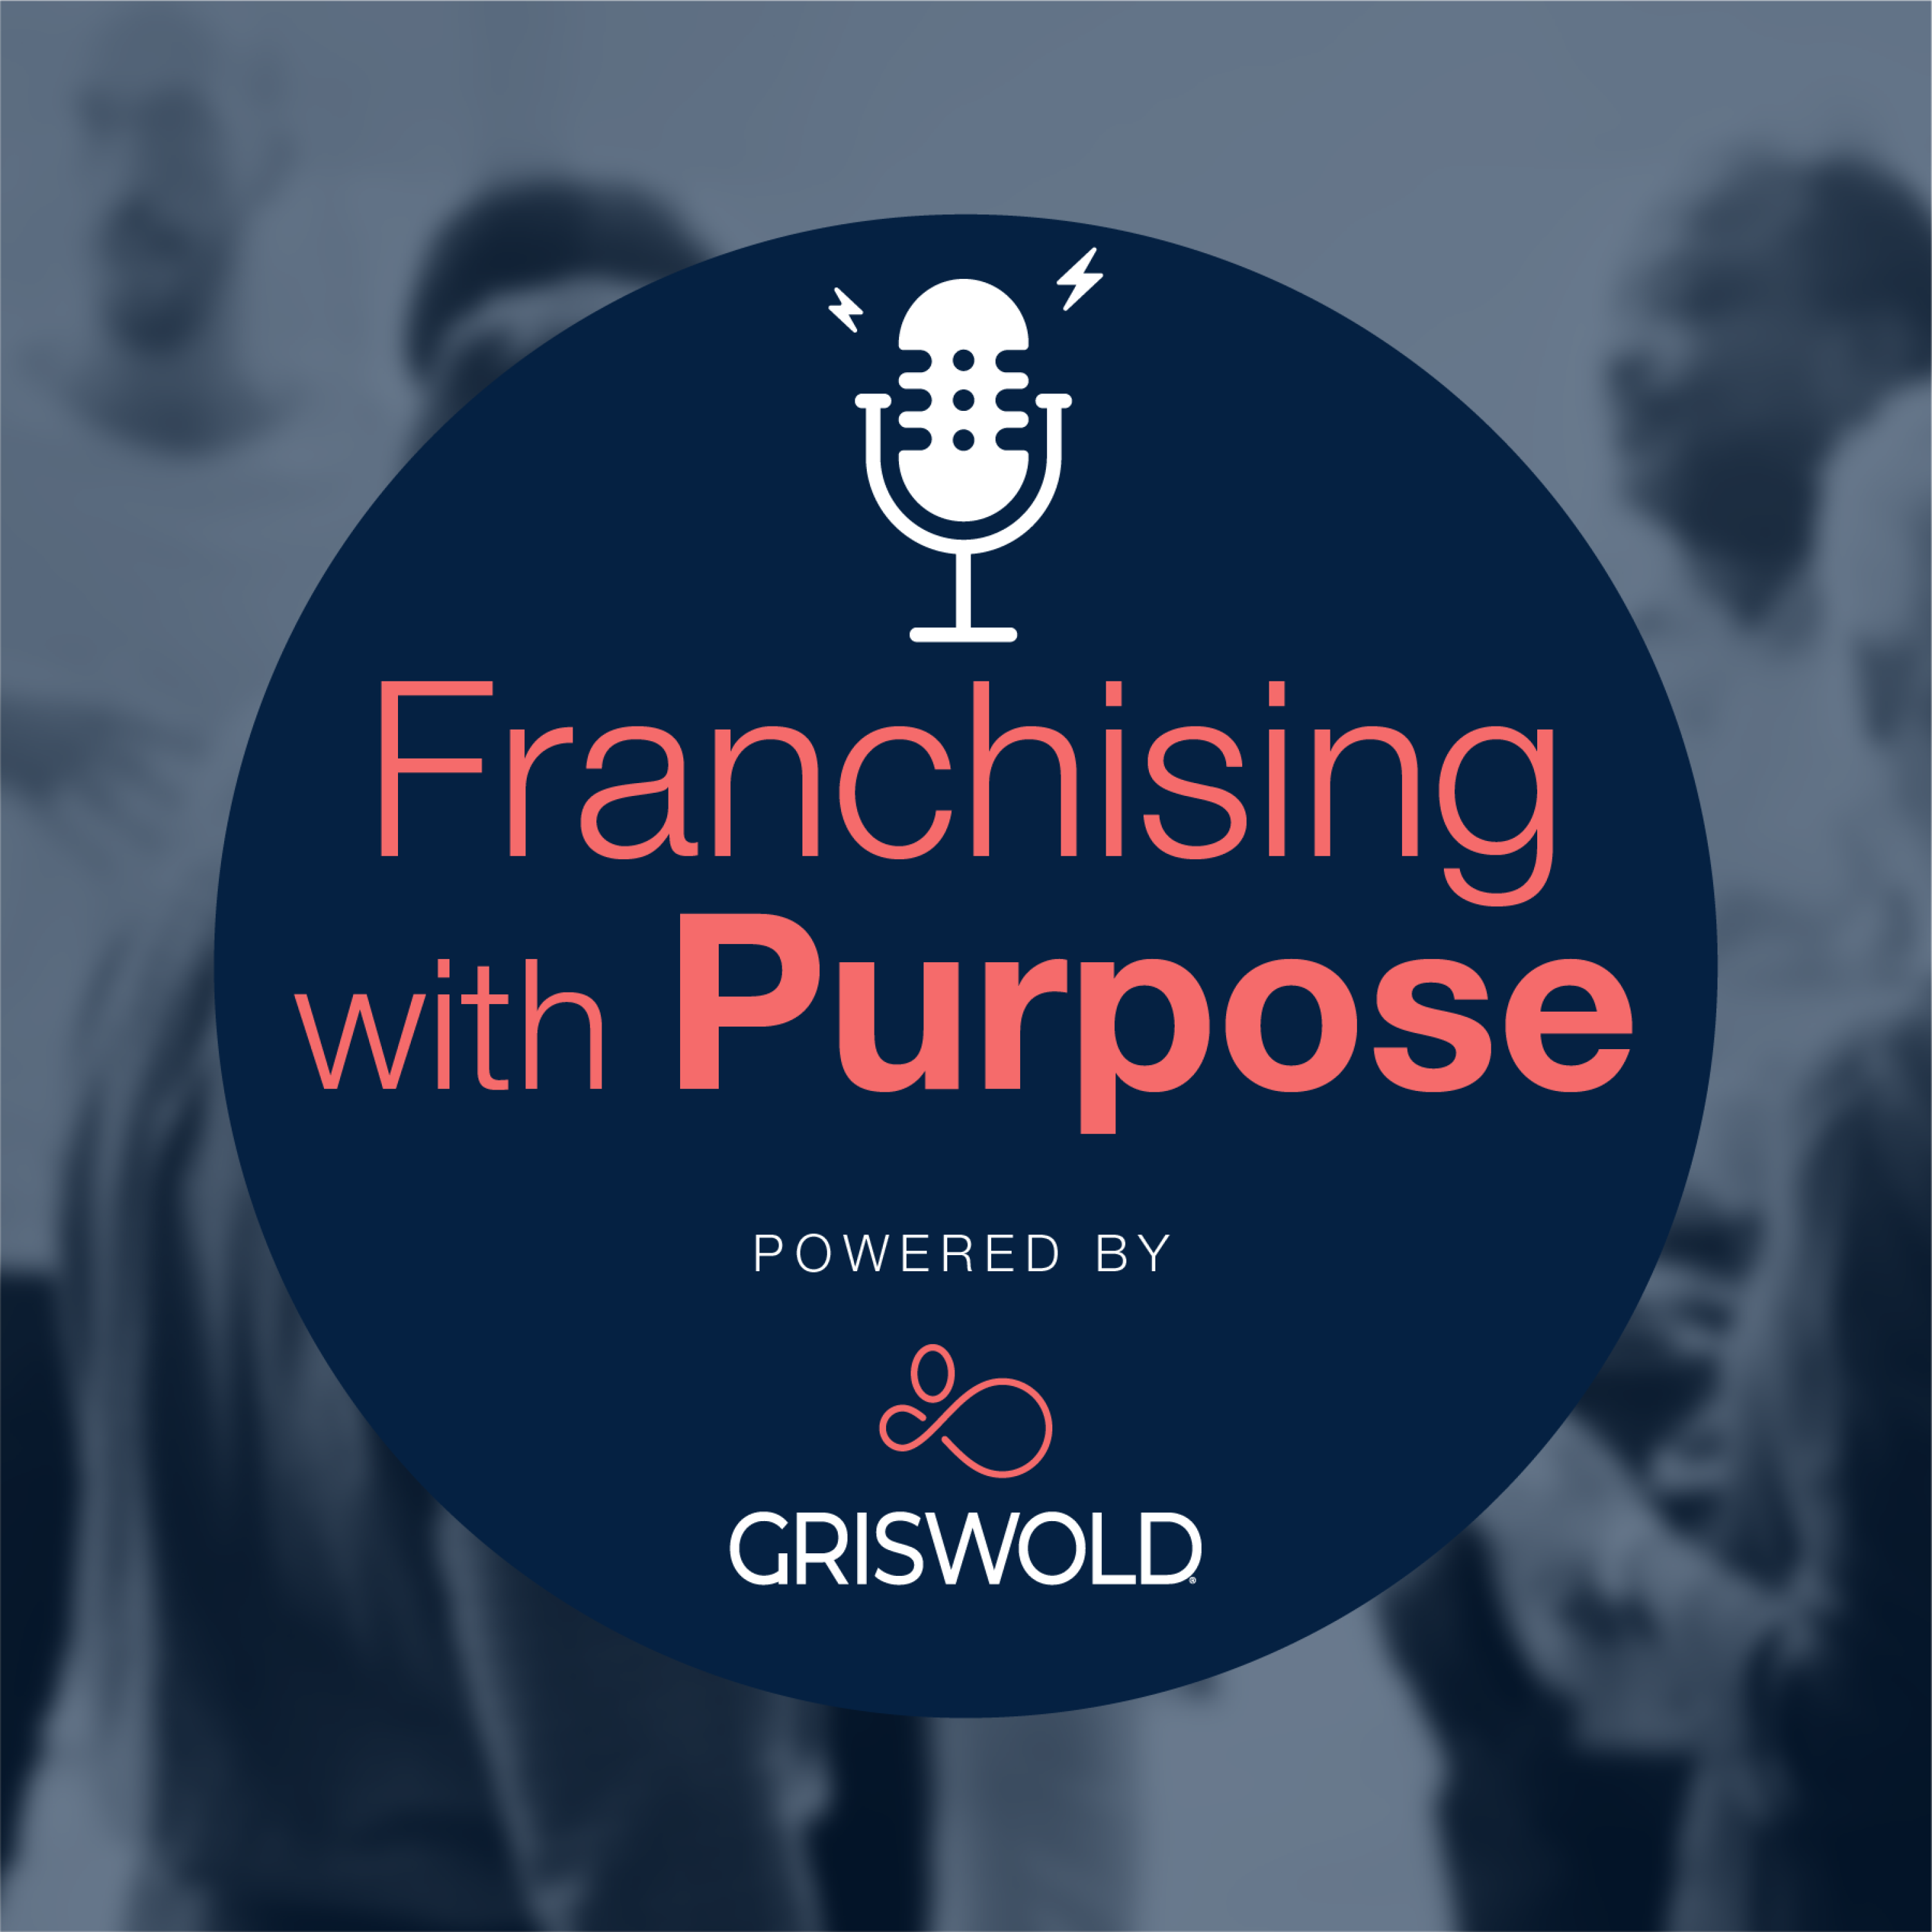 Franchising with Purpose